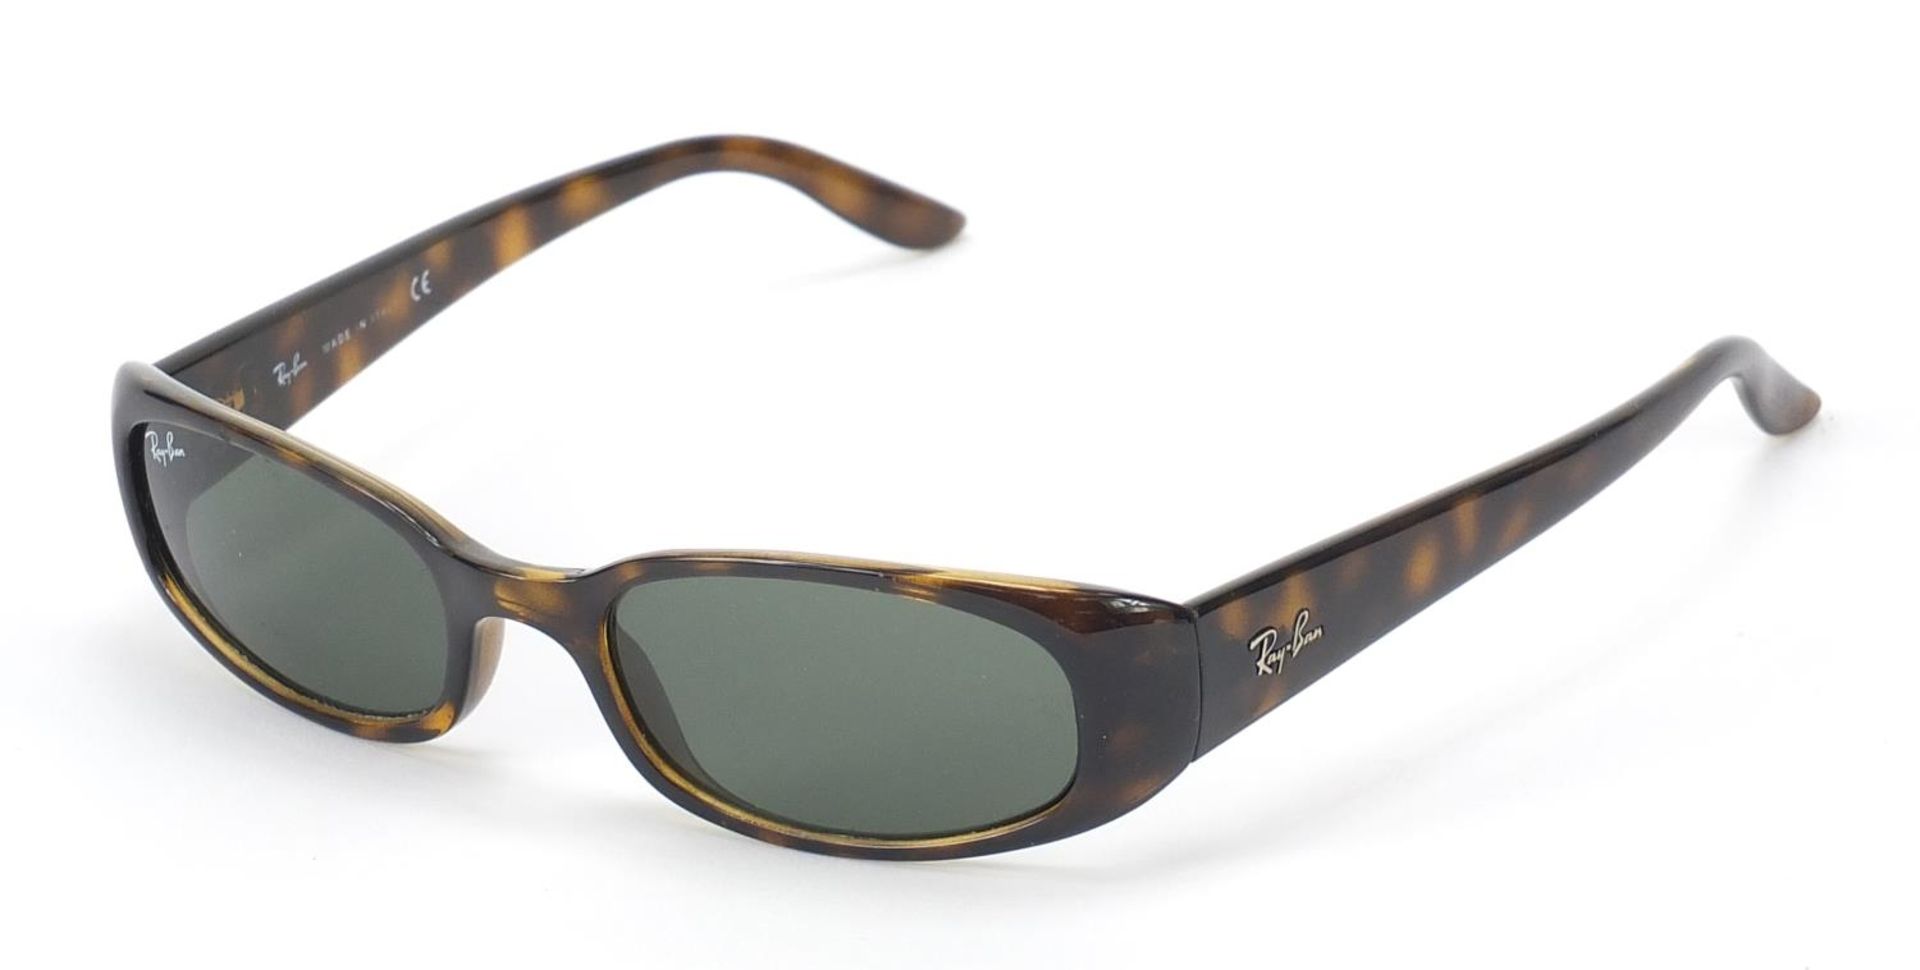 Cased pair of Ray-Ban tortoiseshell design sunglasses with cleaning cloth - Image 2 of 8